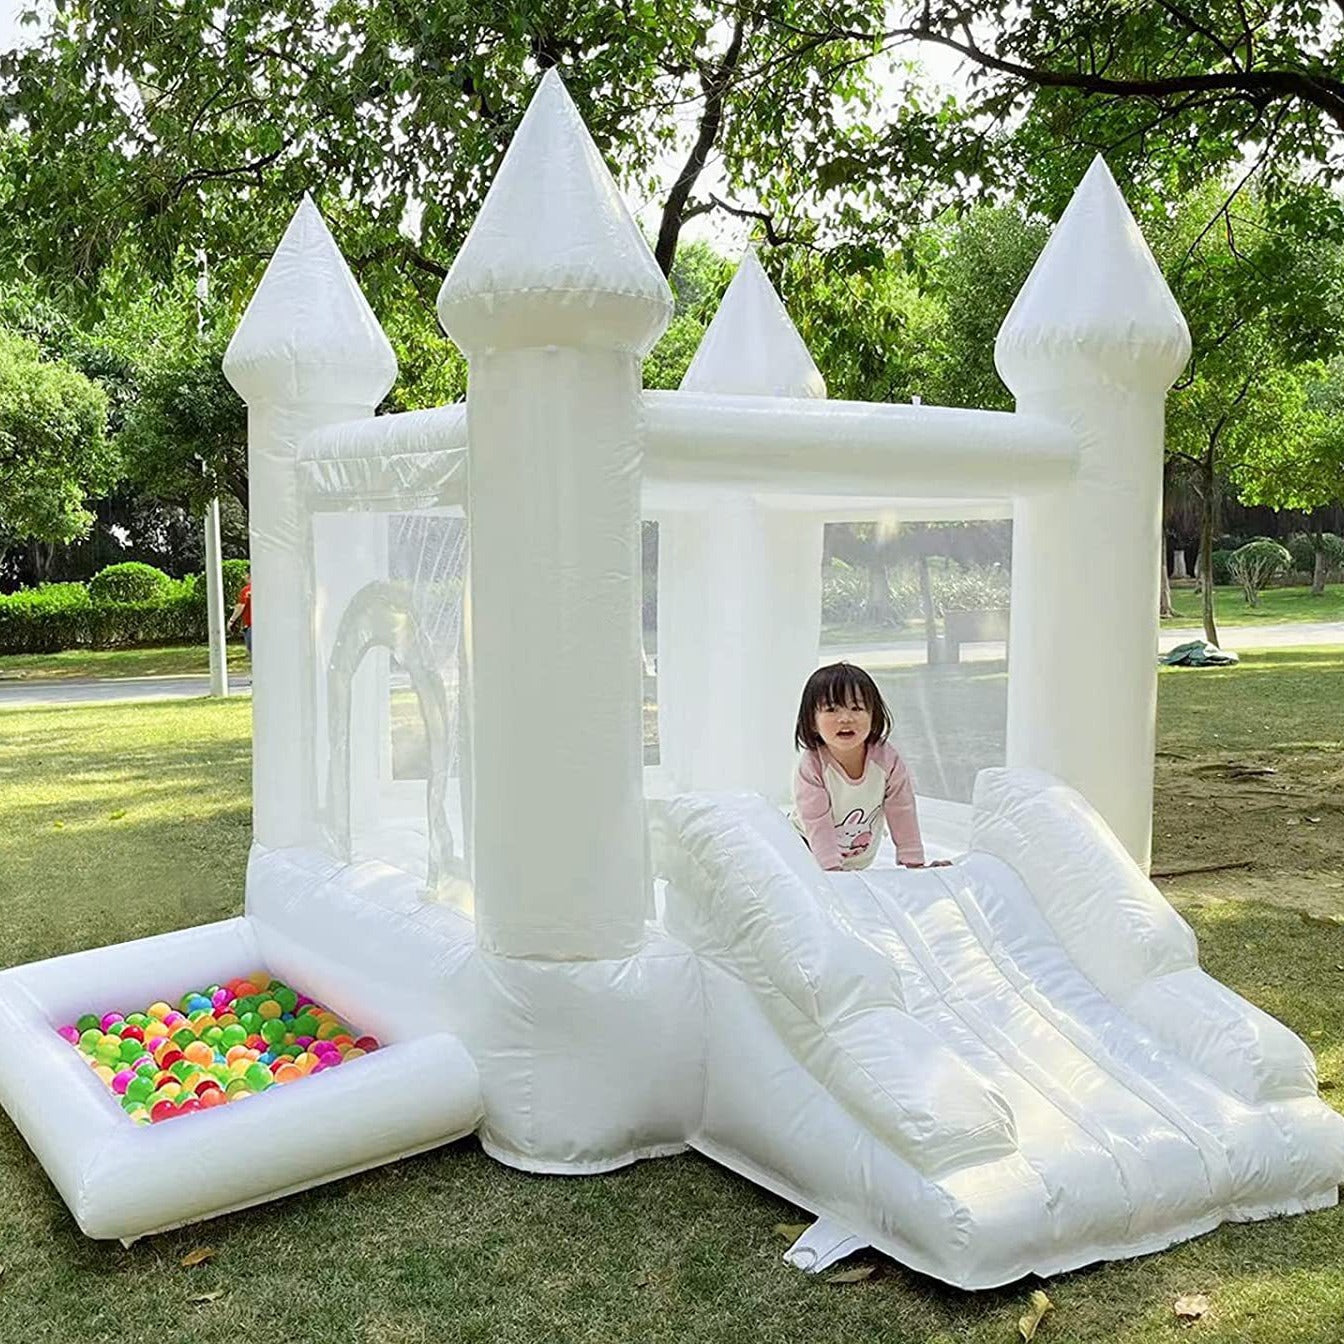 Partybreeze Mini Bounce House Castle For Kids